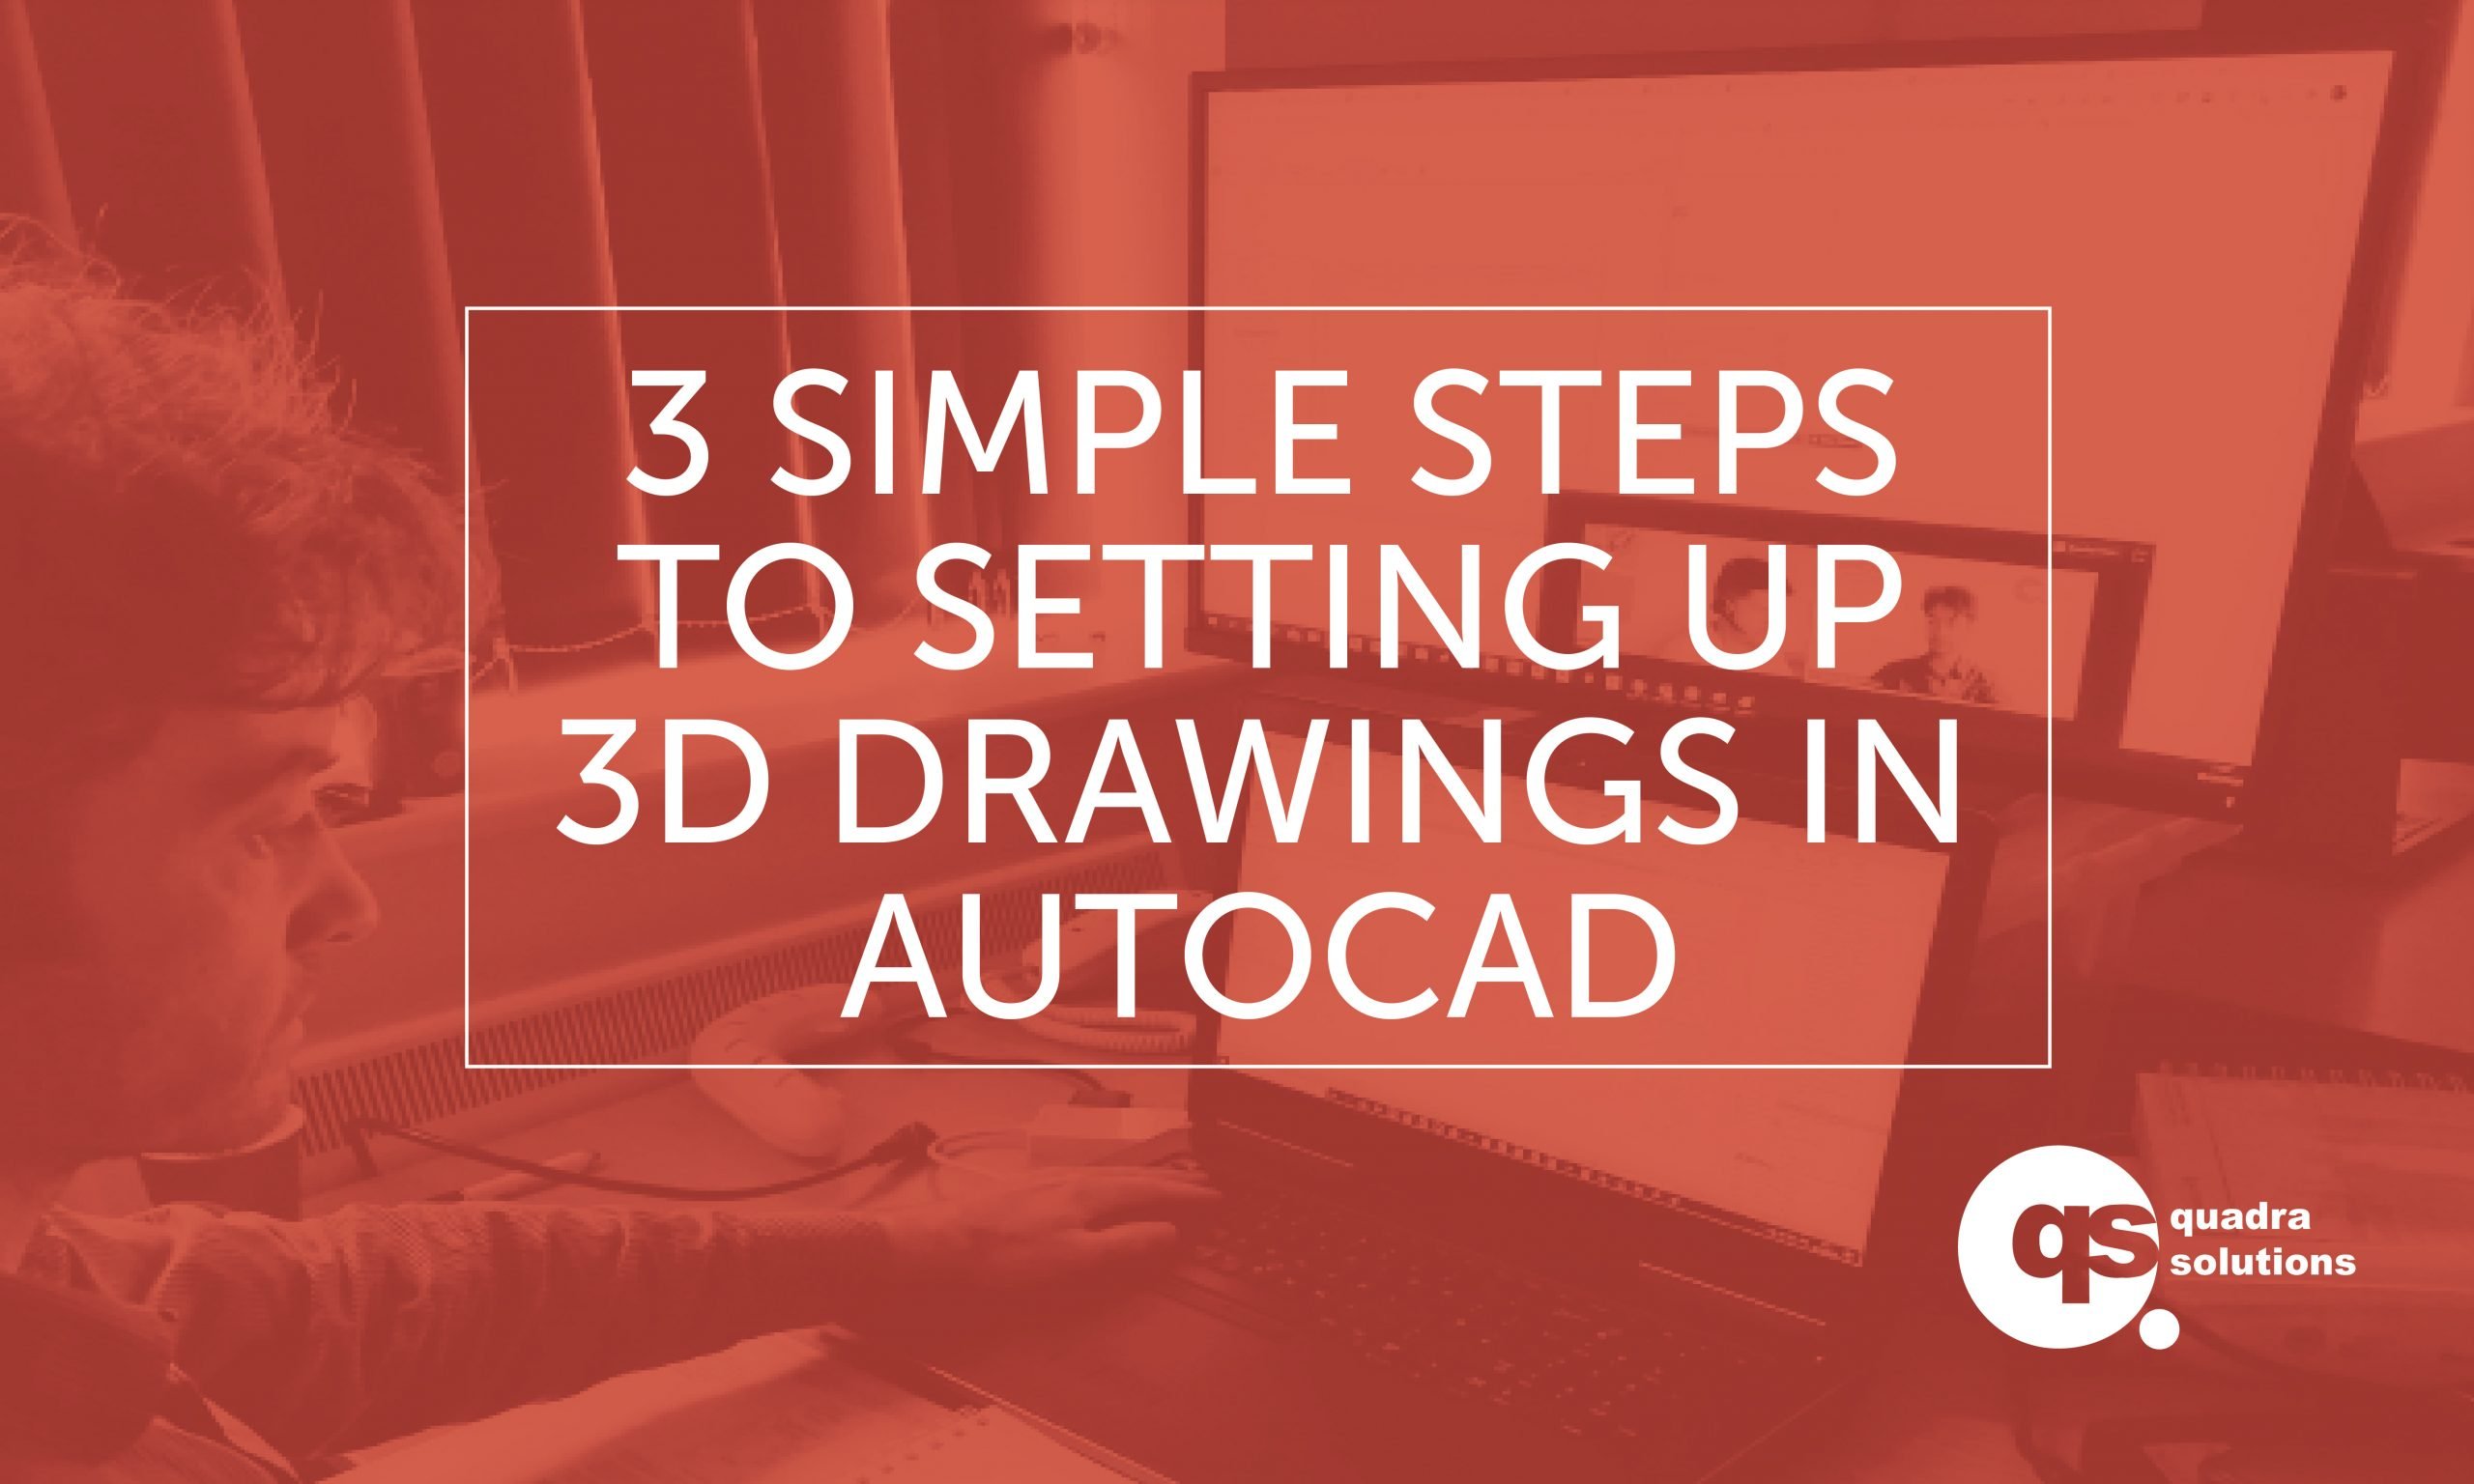 3 Simple Steps to Setting up 3D Drawings in AutoCAD - Quadra Solutions